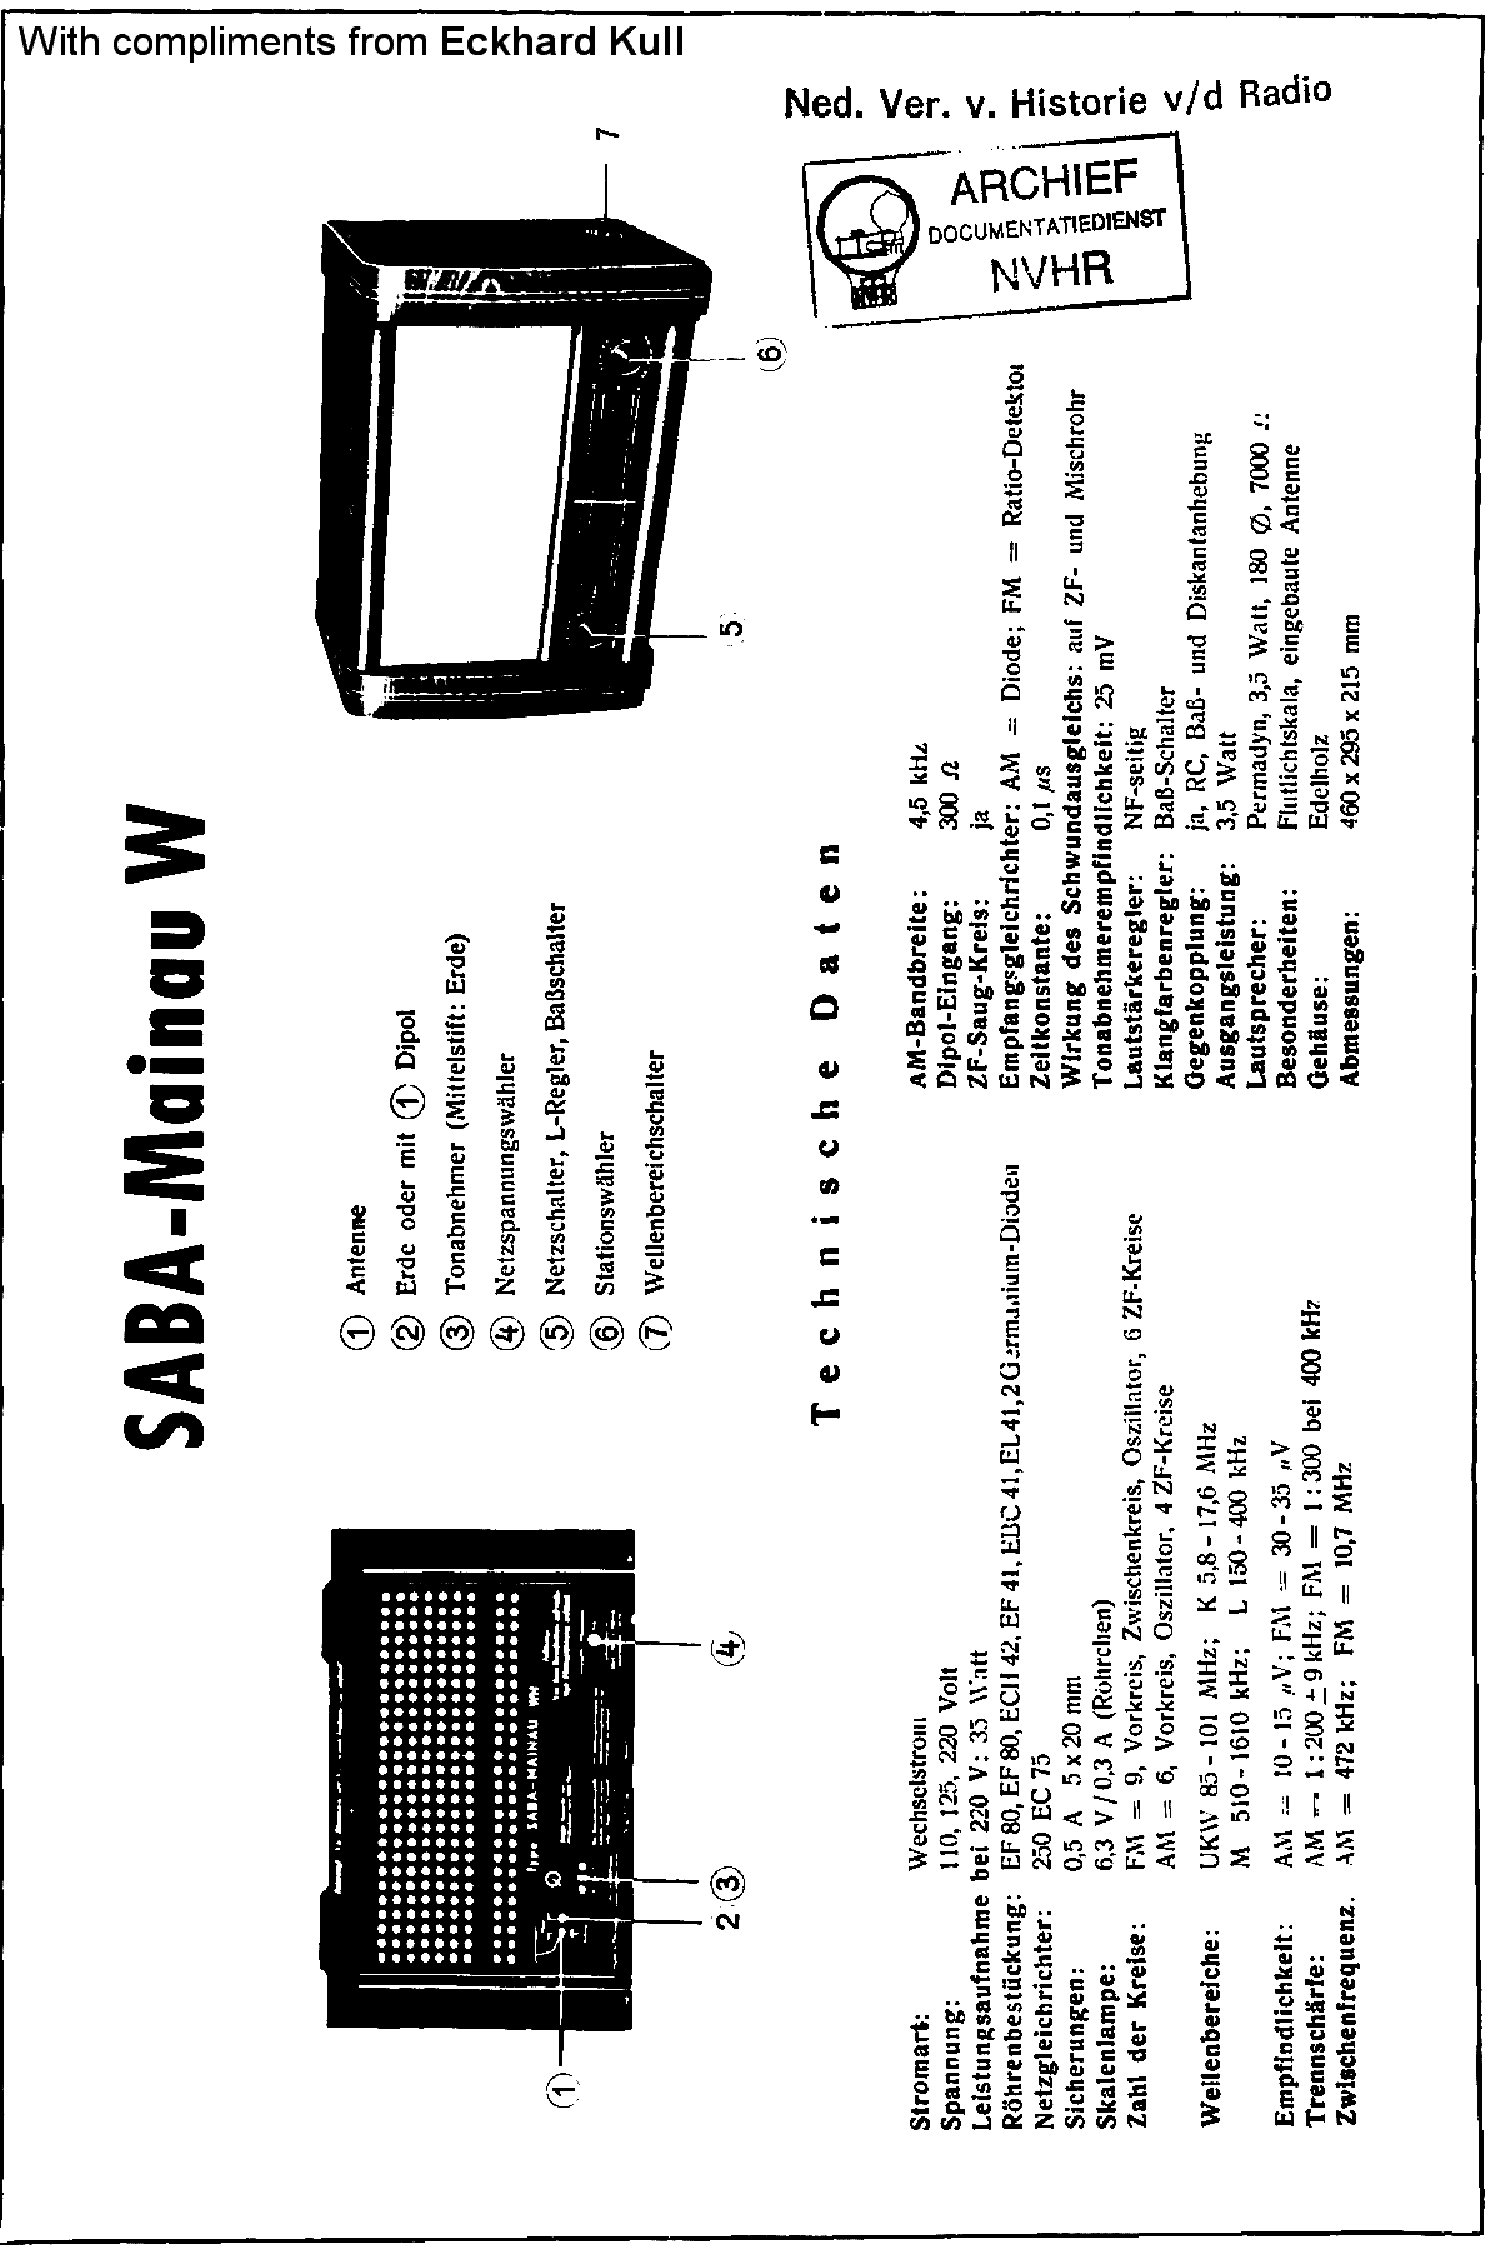 SABA MAINAUW AC RECEIVER 1952 SCH service manual (1st page)